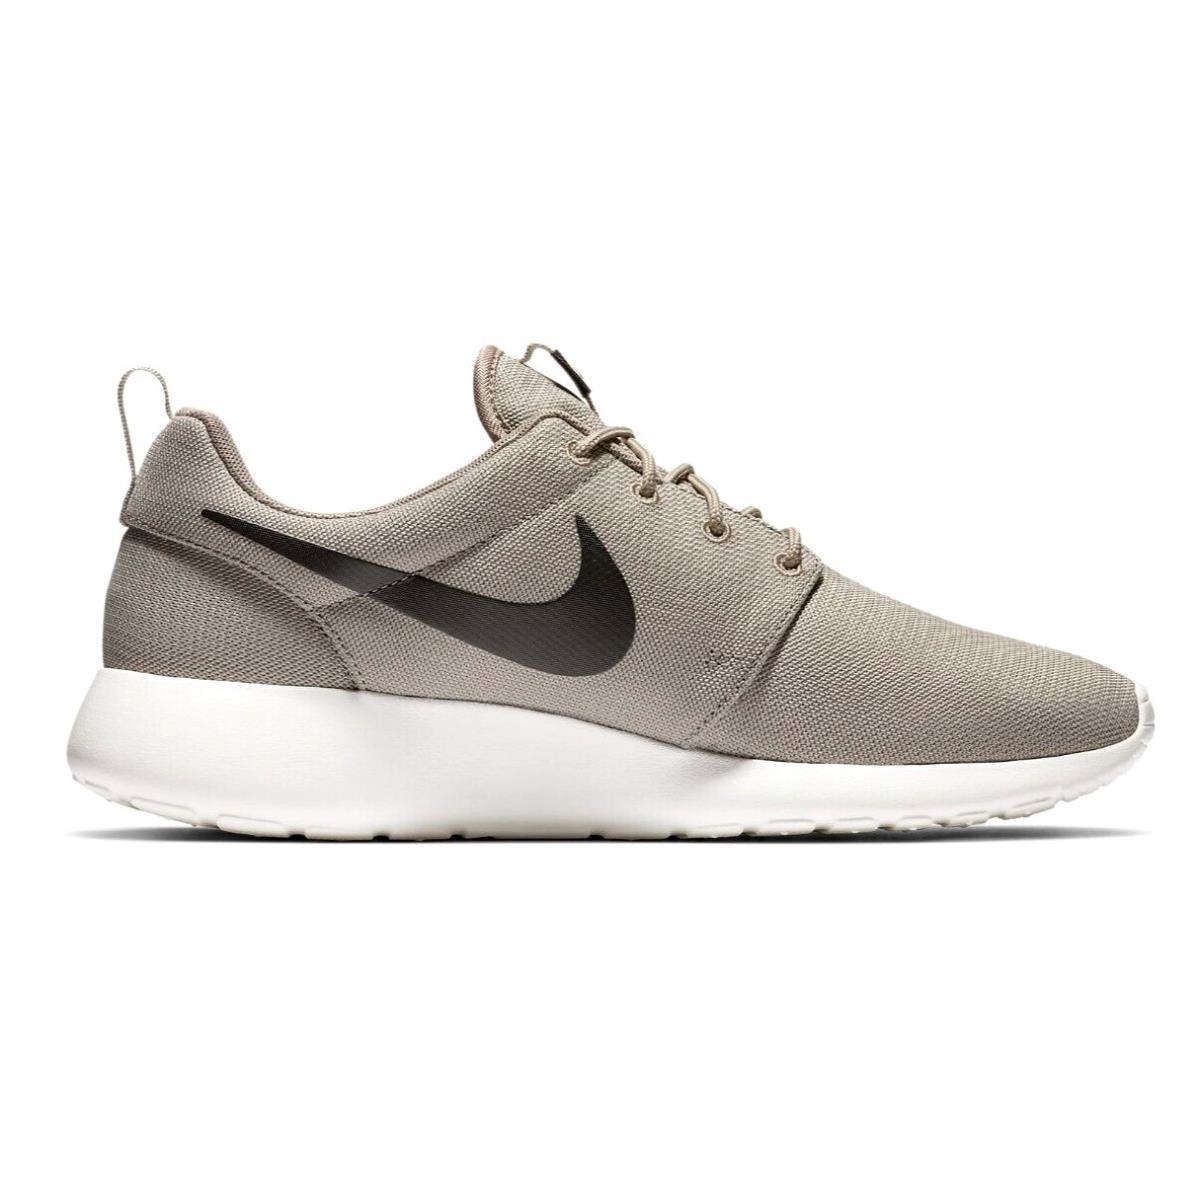 Nike Roshe One Mens Size 11 Shoes 511881 205 Light Taupe/sail/black - Multicolor